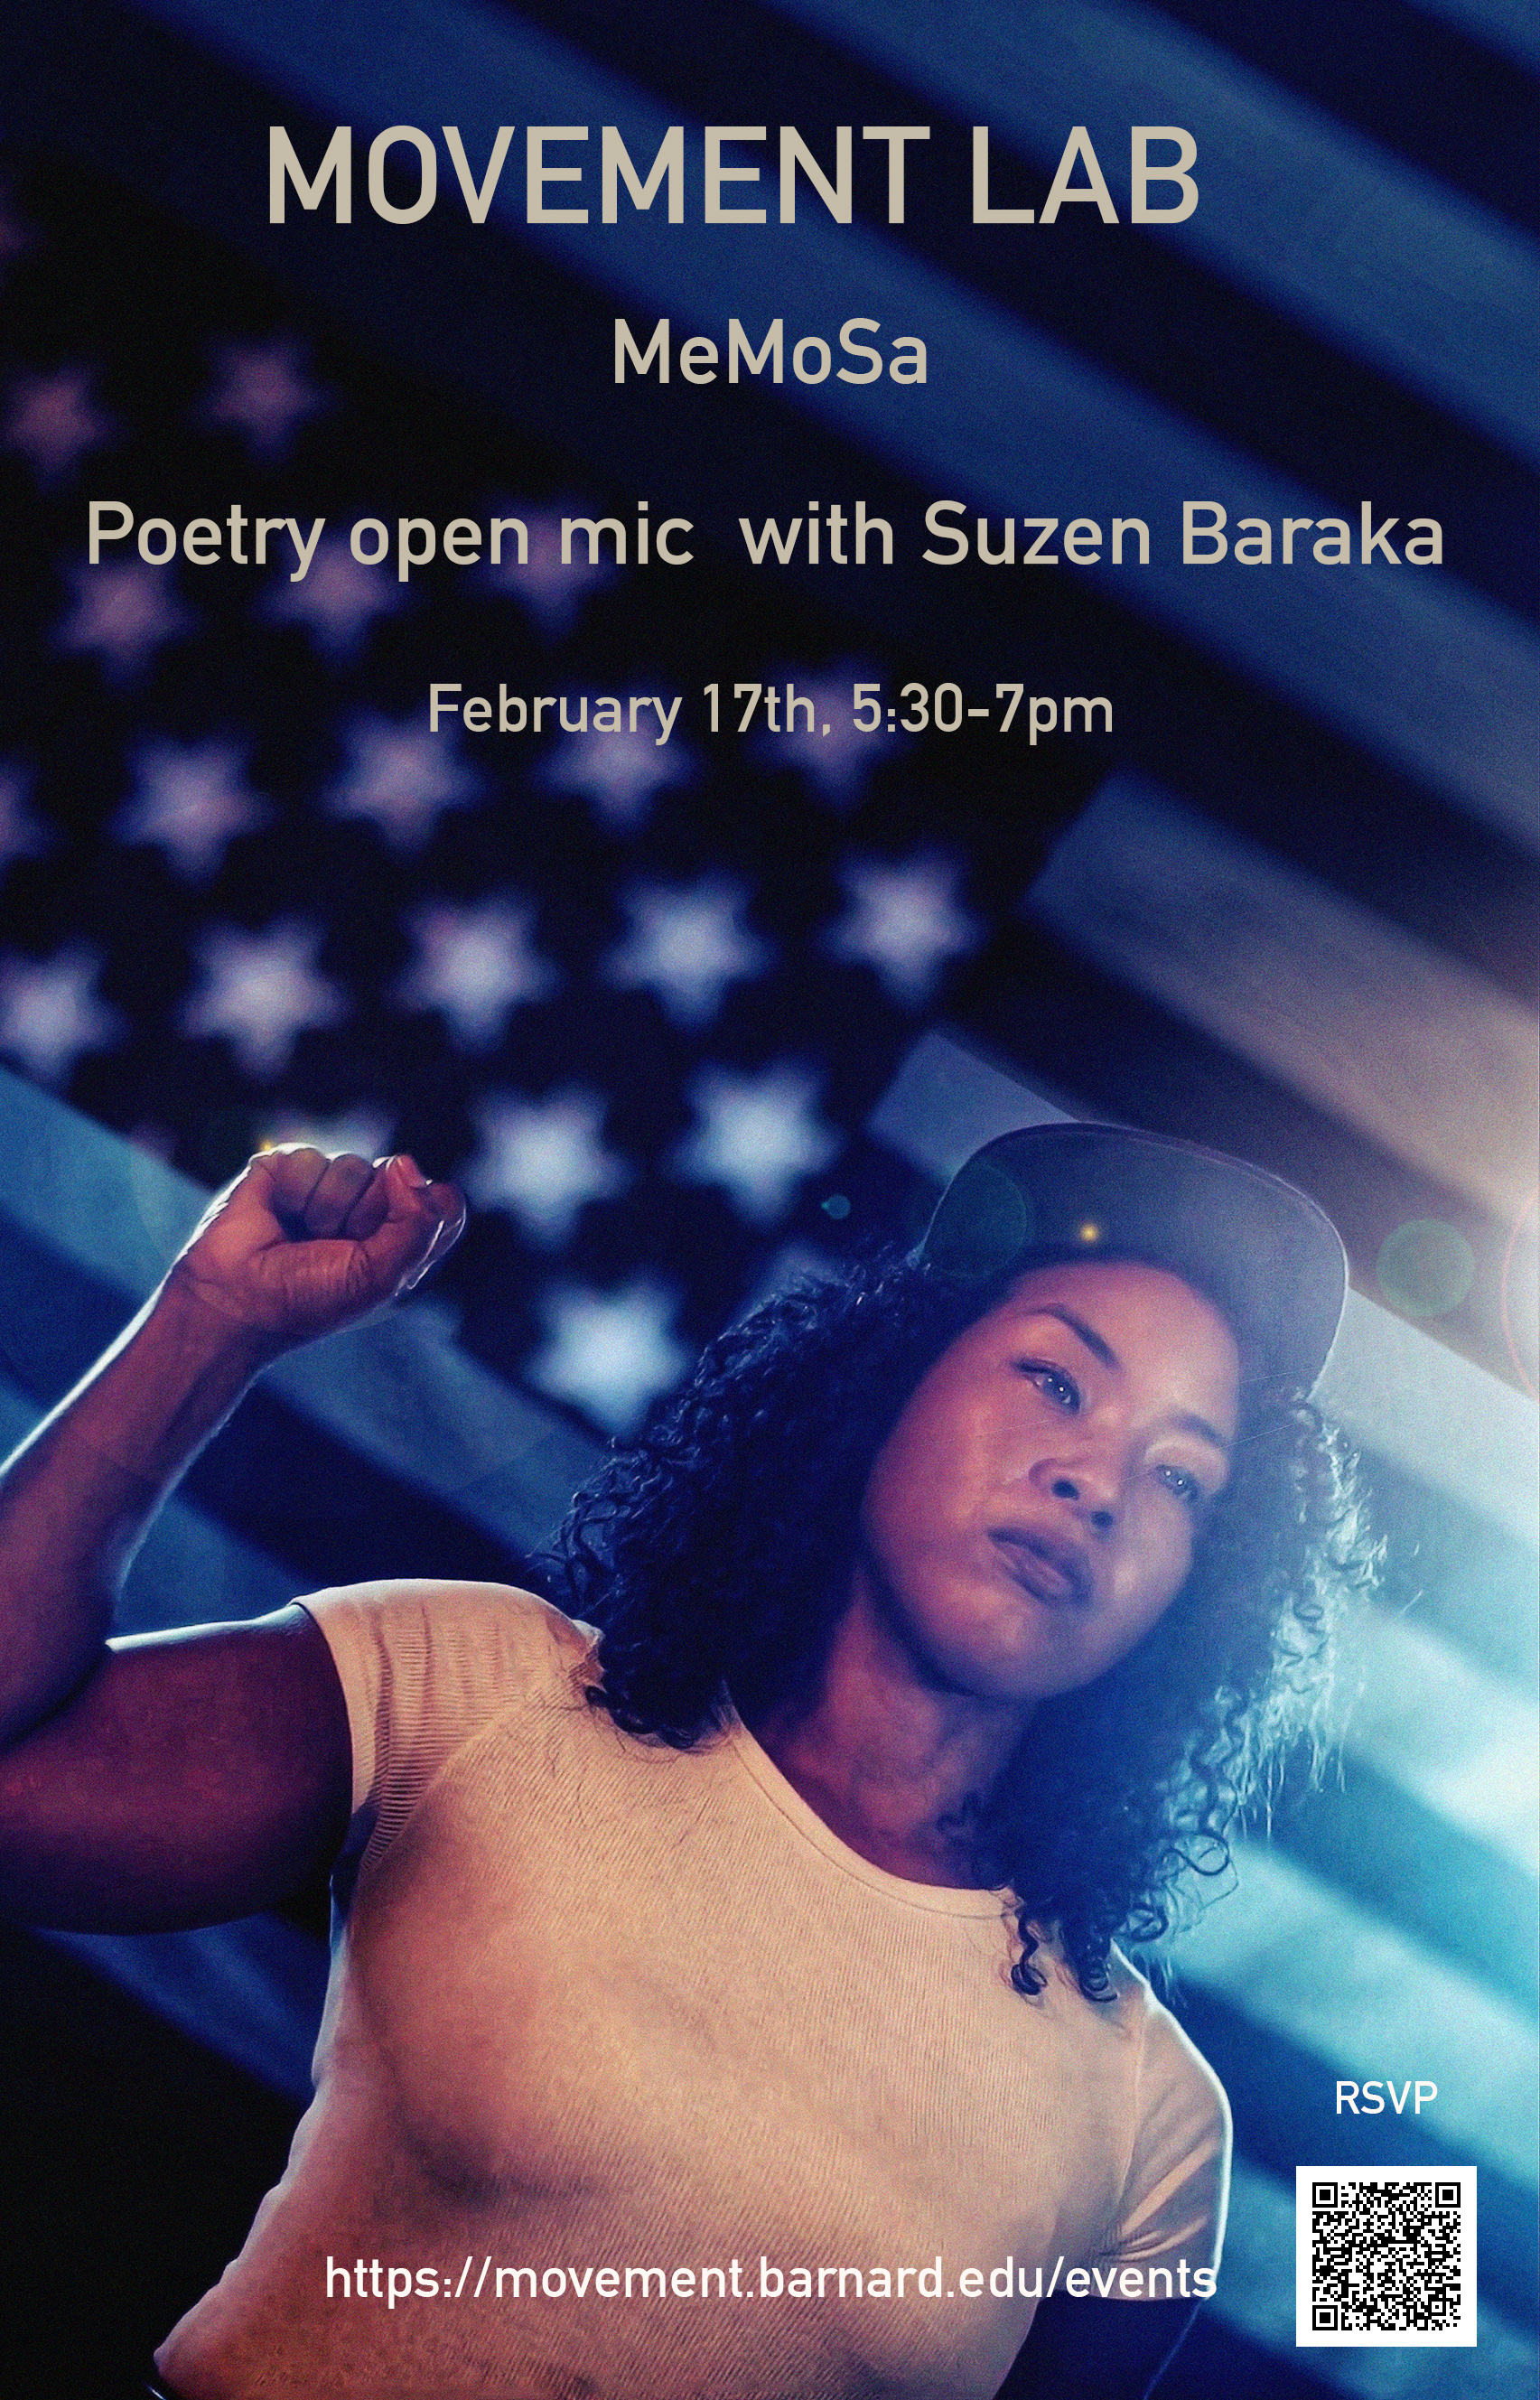 A poster for the poetry open mic featuring Suzen Baraka with her fist raised in front of an American Flag